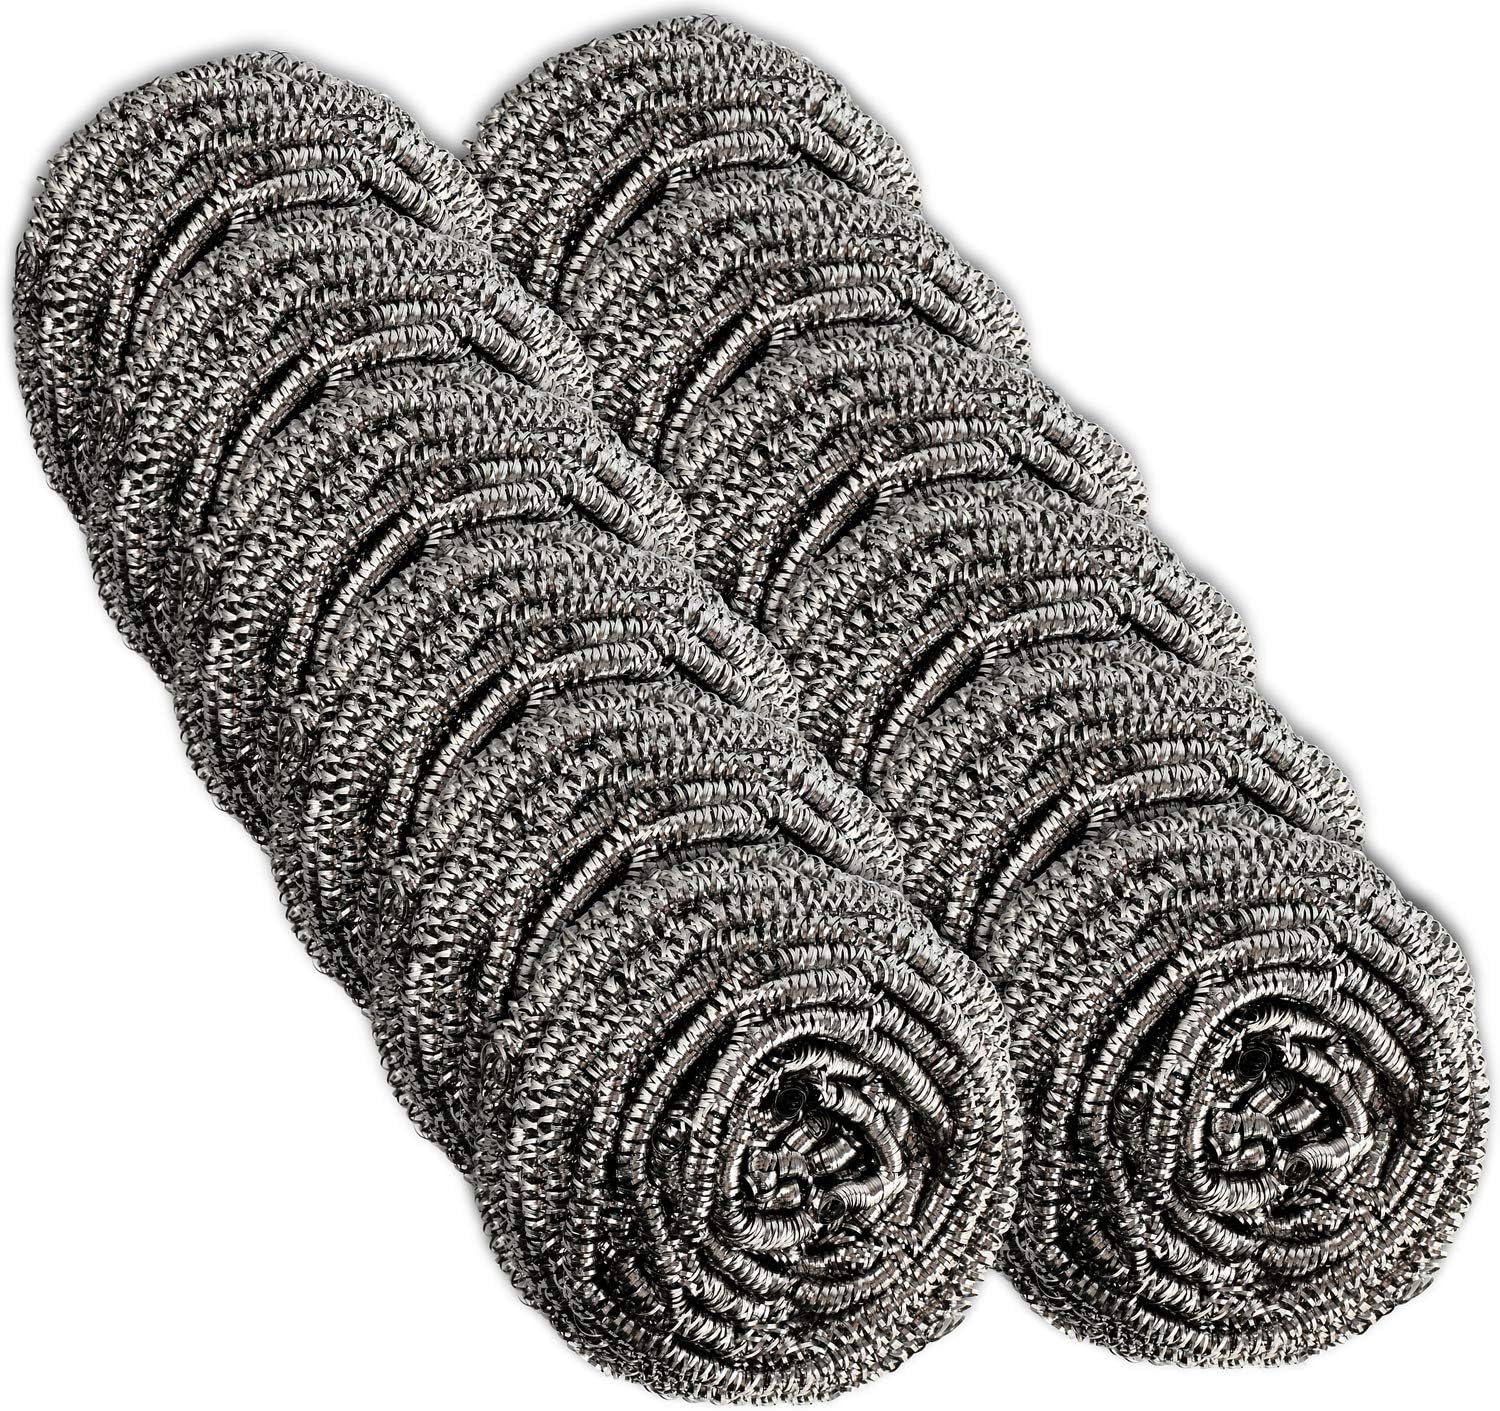 Stainless Steel Scourers by Scrub It – Steel Wool Scrubber Pad Used for Dishes, Pots, Pans, and Ovens. Easy scouring for Tough Kitchen Cleaning